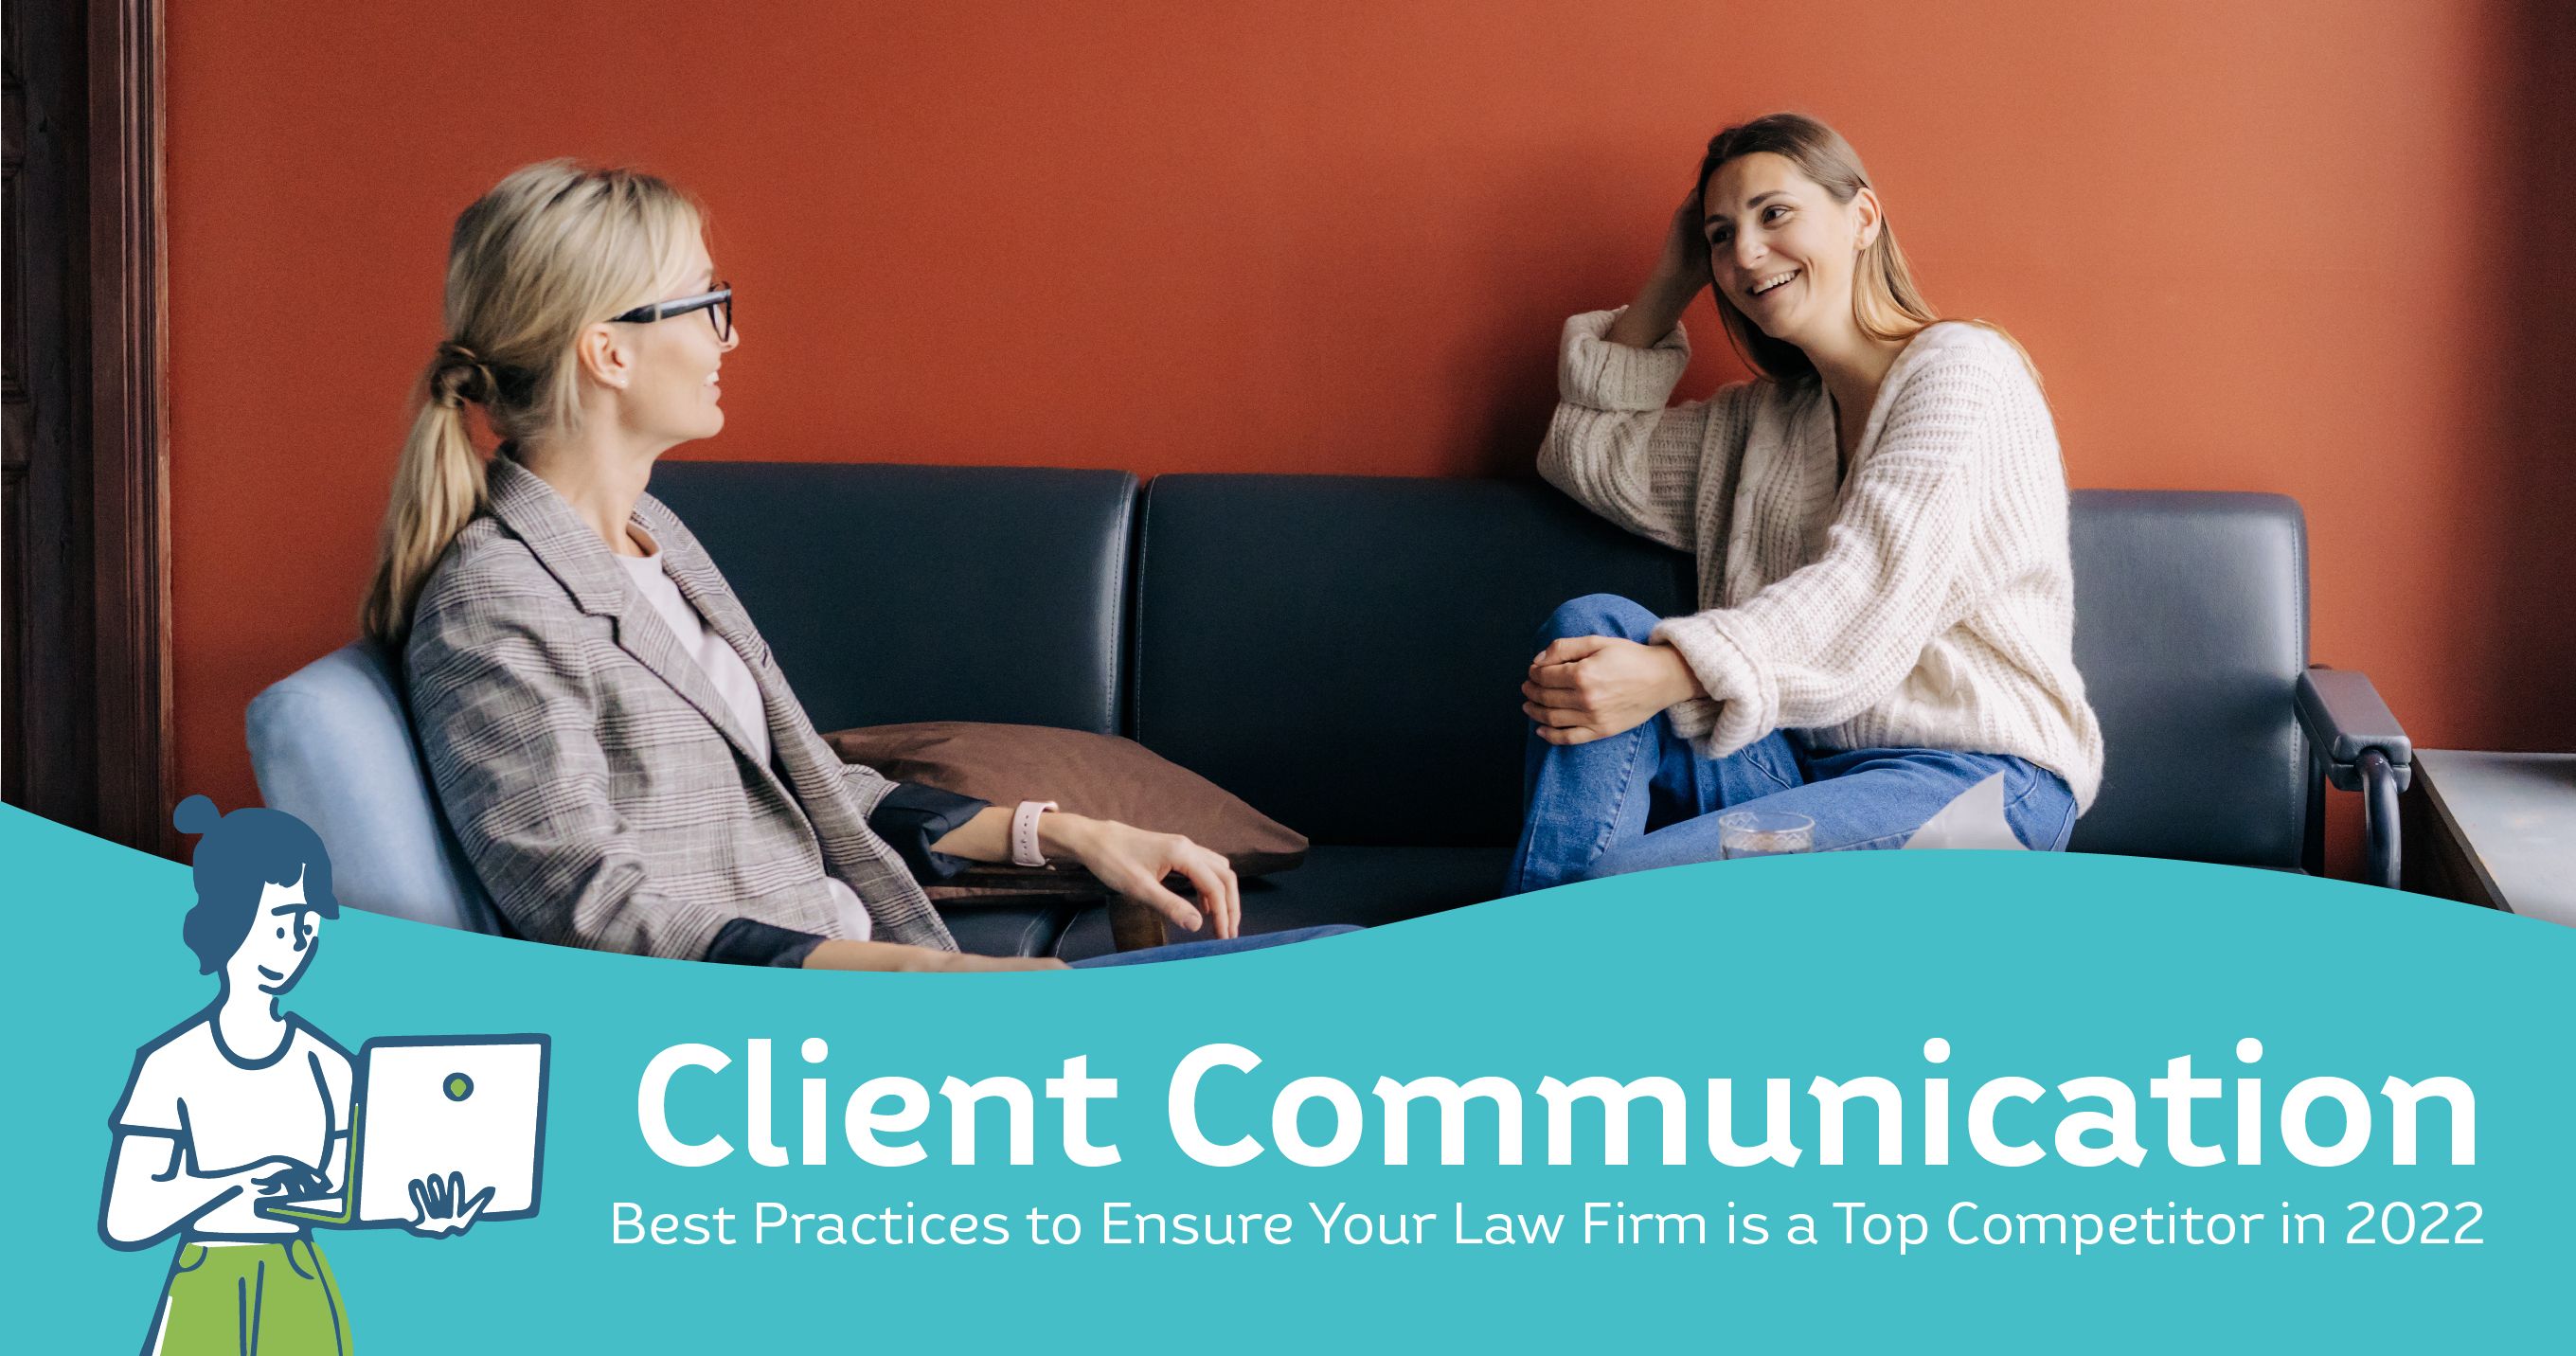 7 Client Communication Best Practices for Law Firms in 2022